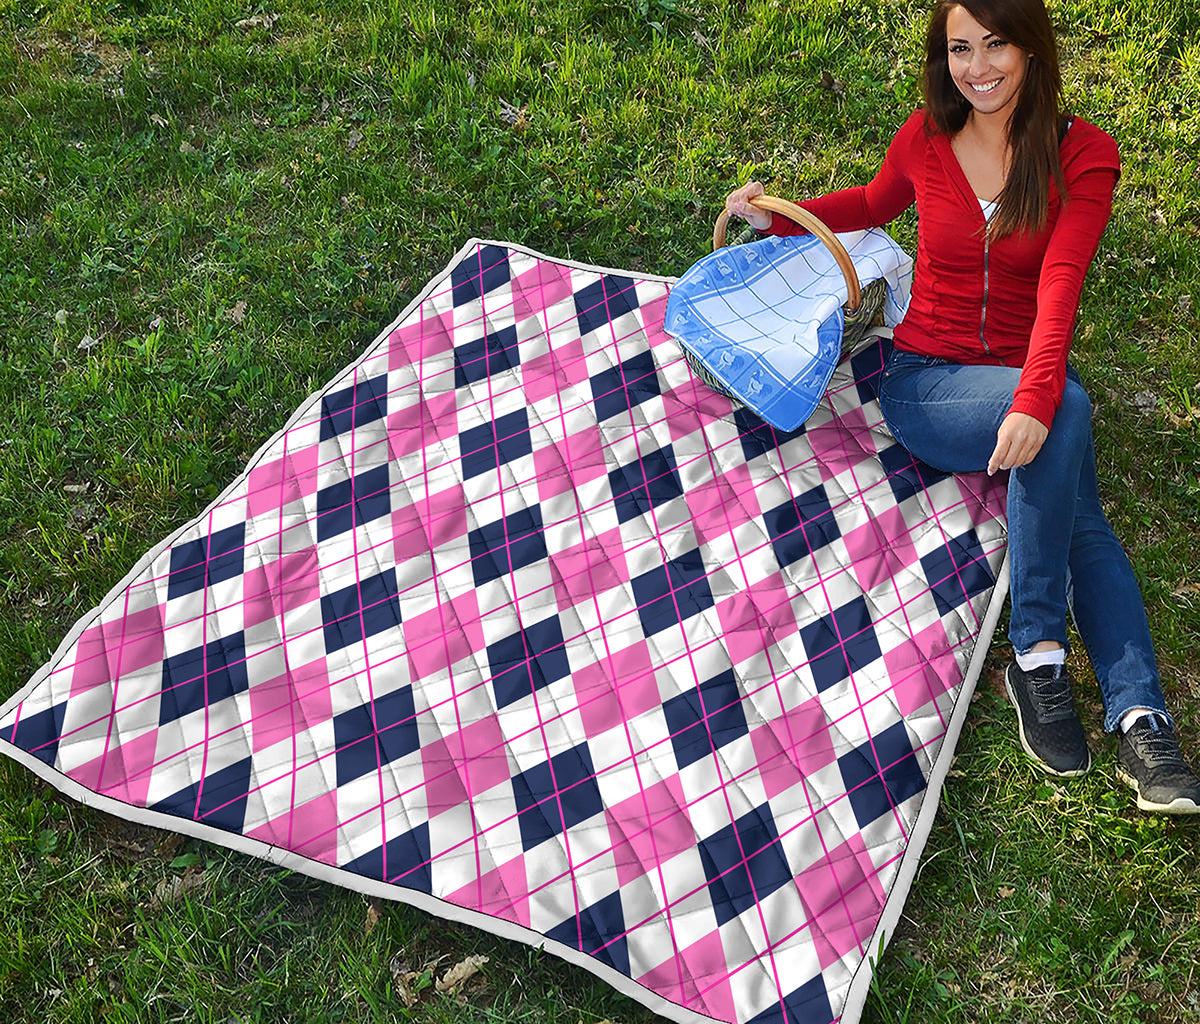 White Pink And Blue Argyle Pattern Print Quilt